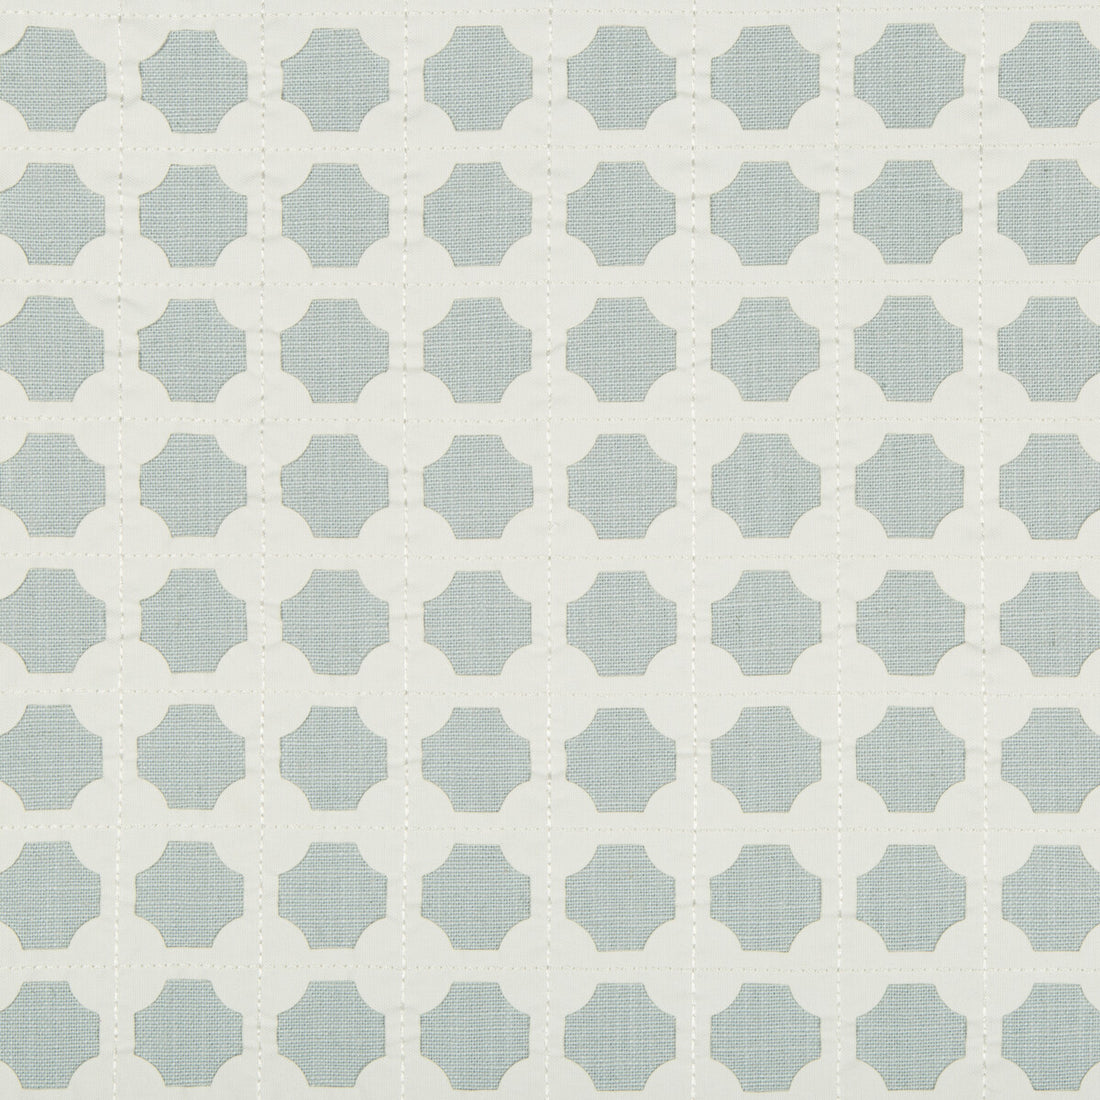 Cothay fabric in wedgewood color - pattern 4556.15.0 - by Kravet Basics in the Greenwich collection